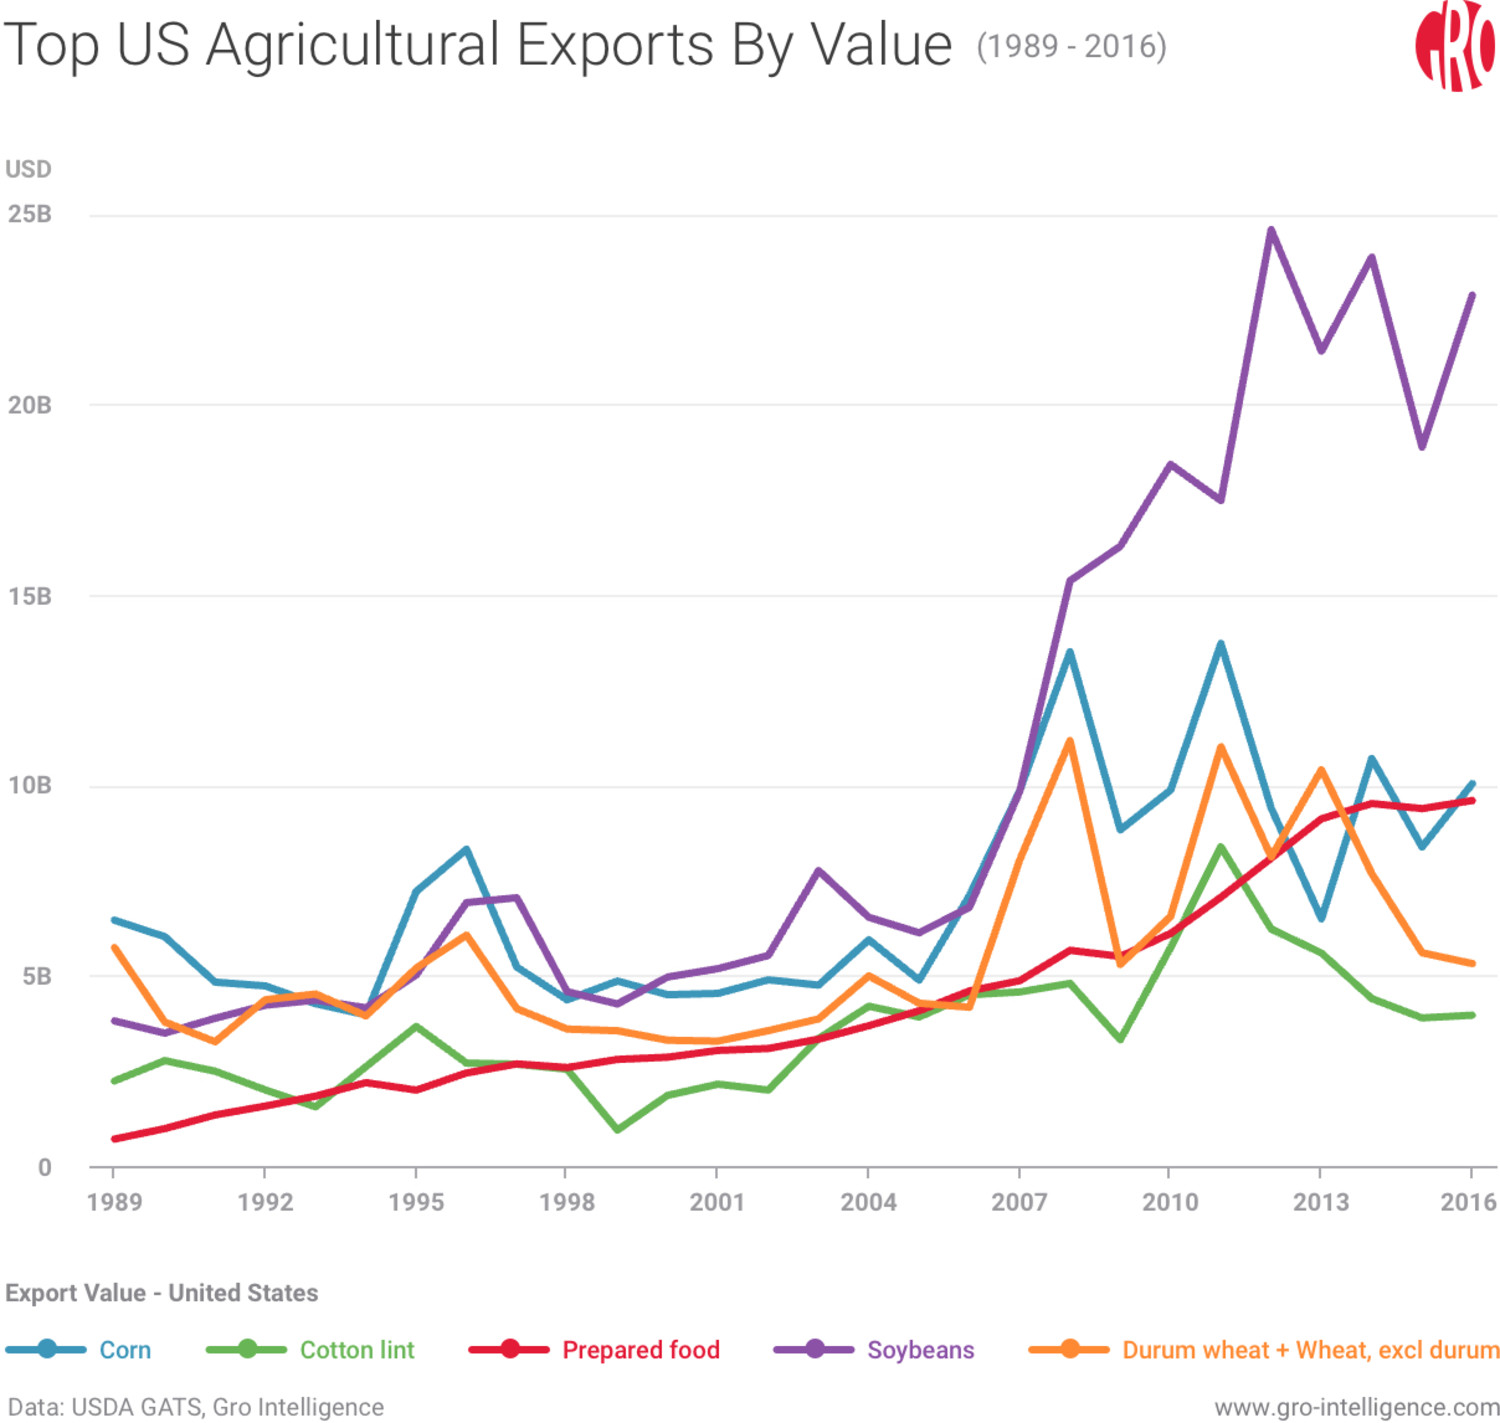 Top US Agricultural Exports by Value